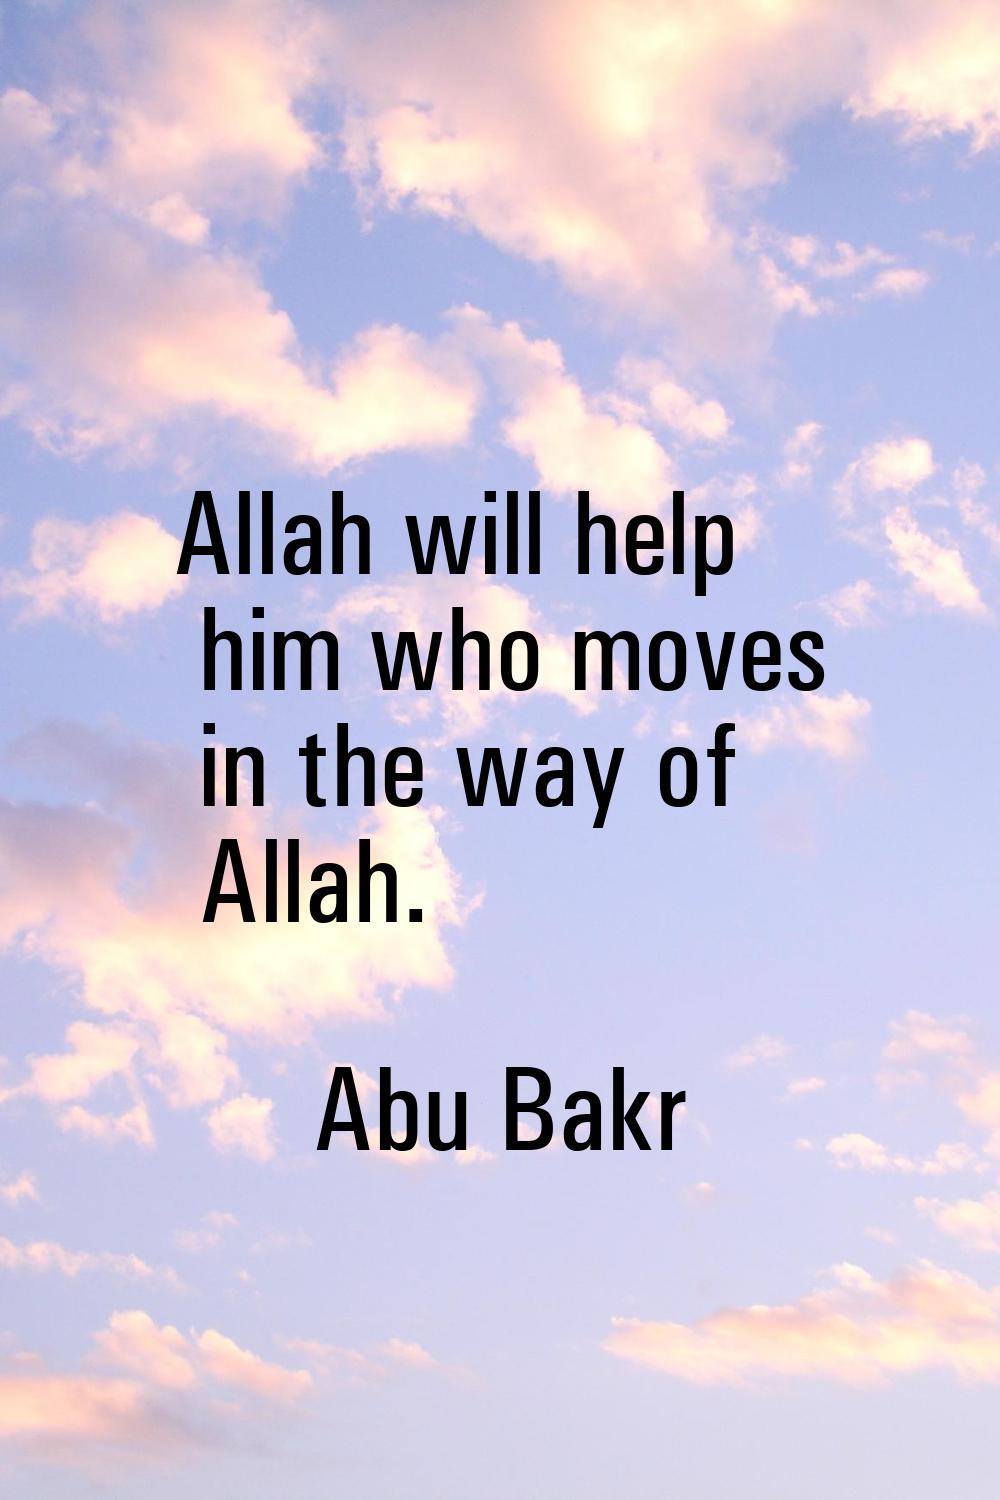 Allah will help him who moves in the way of Allah.